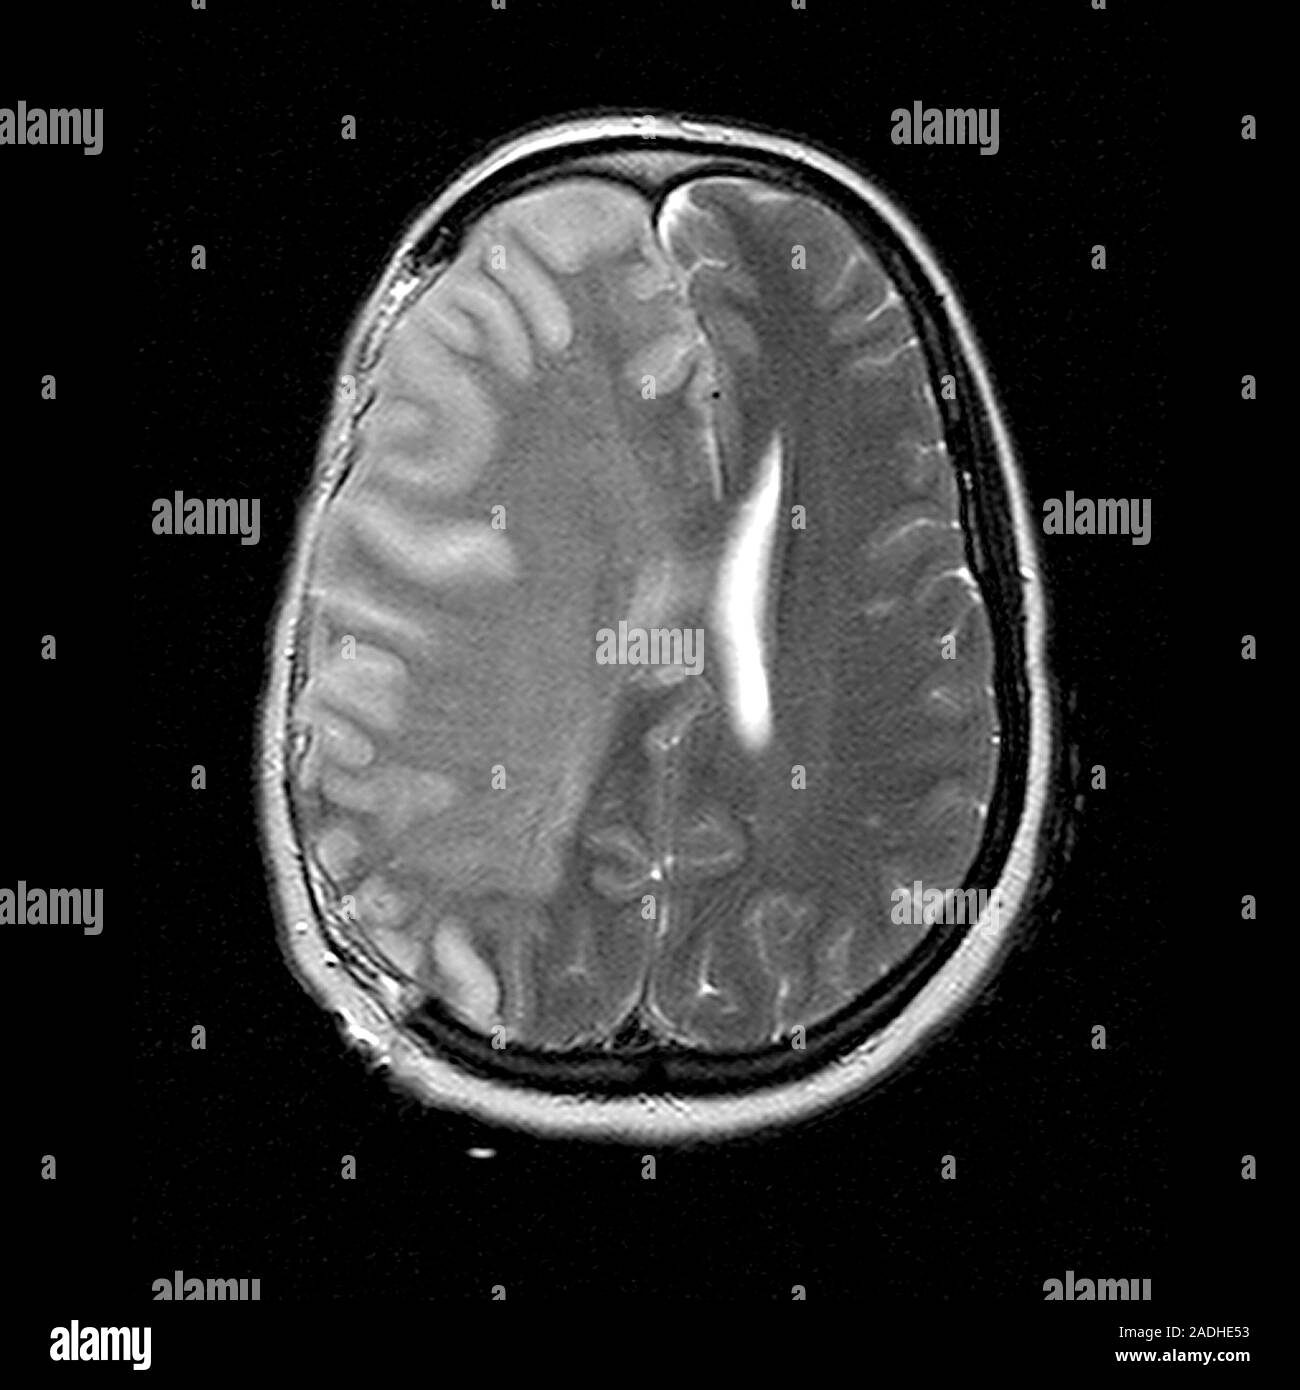 Stroke. Magnetic resonance imaging (MRI) scan of the brain of a 32 year ...